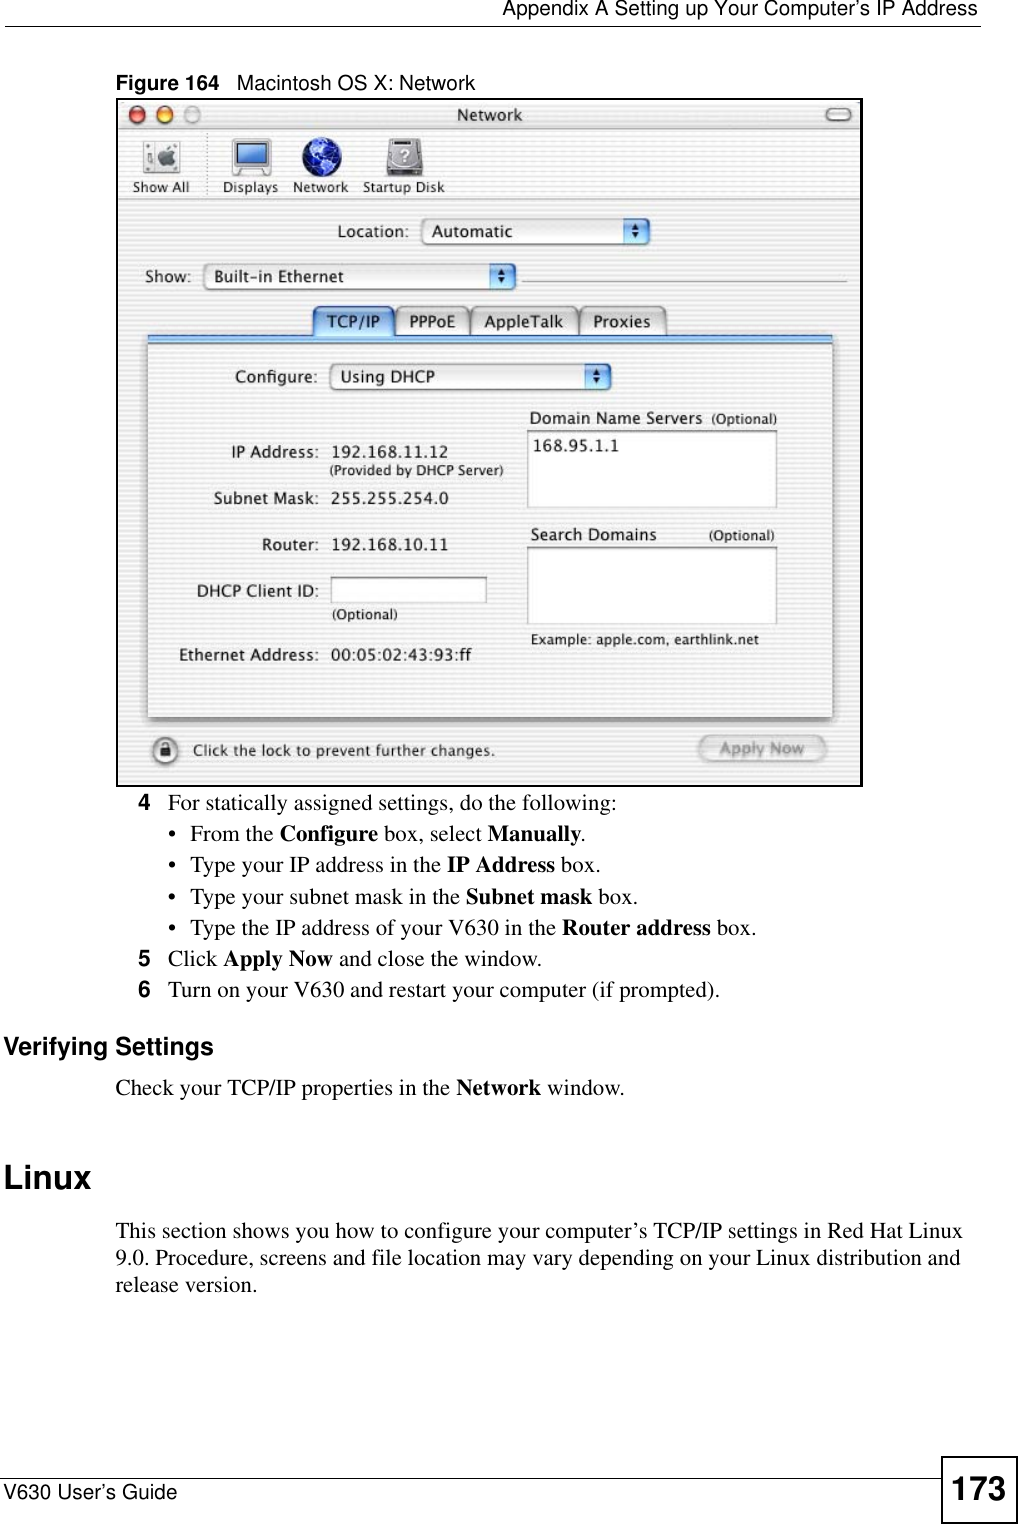  Appendix A Setting up Your Computer’s IP AddressV630 User’s Guide 173Figure 164   Macintosh OS X: Network4For statically assigned settings, do the following:•From the Configure box, select Manually.• Type your IP address in the IP Address box.• Type your subnet mask in the Subnet mask box.• Type the IP address of your V630 in the Router address box.5Click Apply Now and close the window.6Turn on your V630 and restart your computer (if prompted).Verifying SettingsCheck your TCP/IP properties in the Network window.Linux This section shows you how to configure your computer’s TCP/IP settings in Red Hat Linux 9.0. Procedure, screens and file location may vary depending on your Linux distribution and release version. 